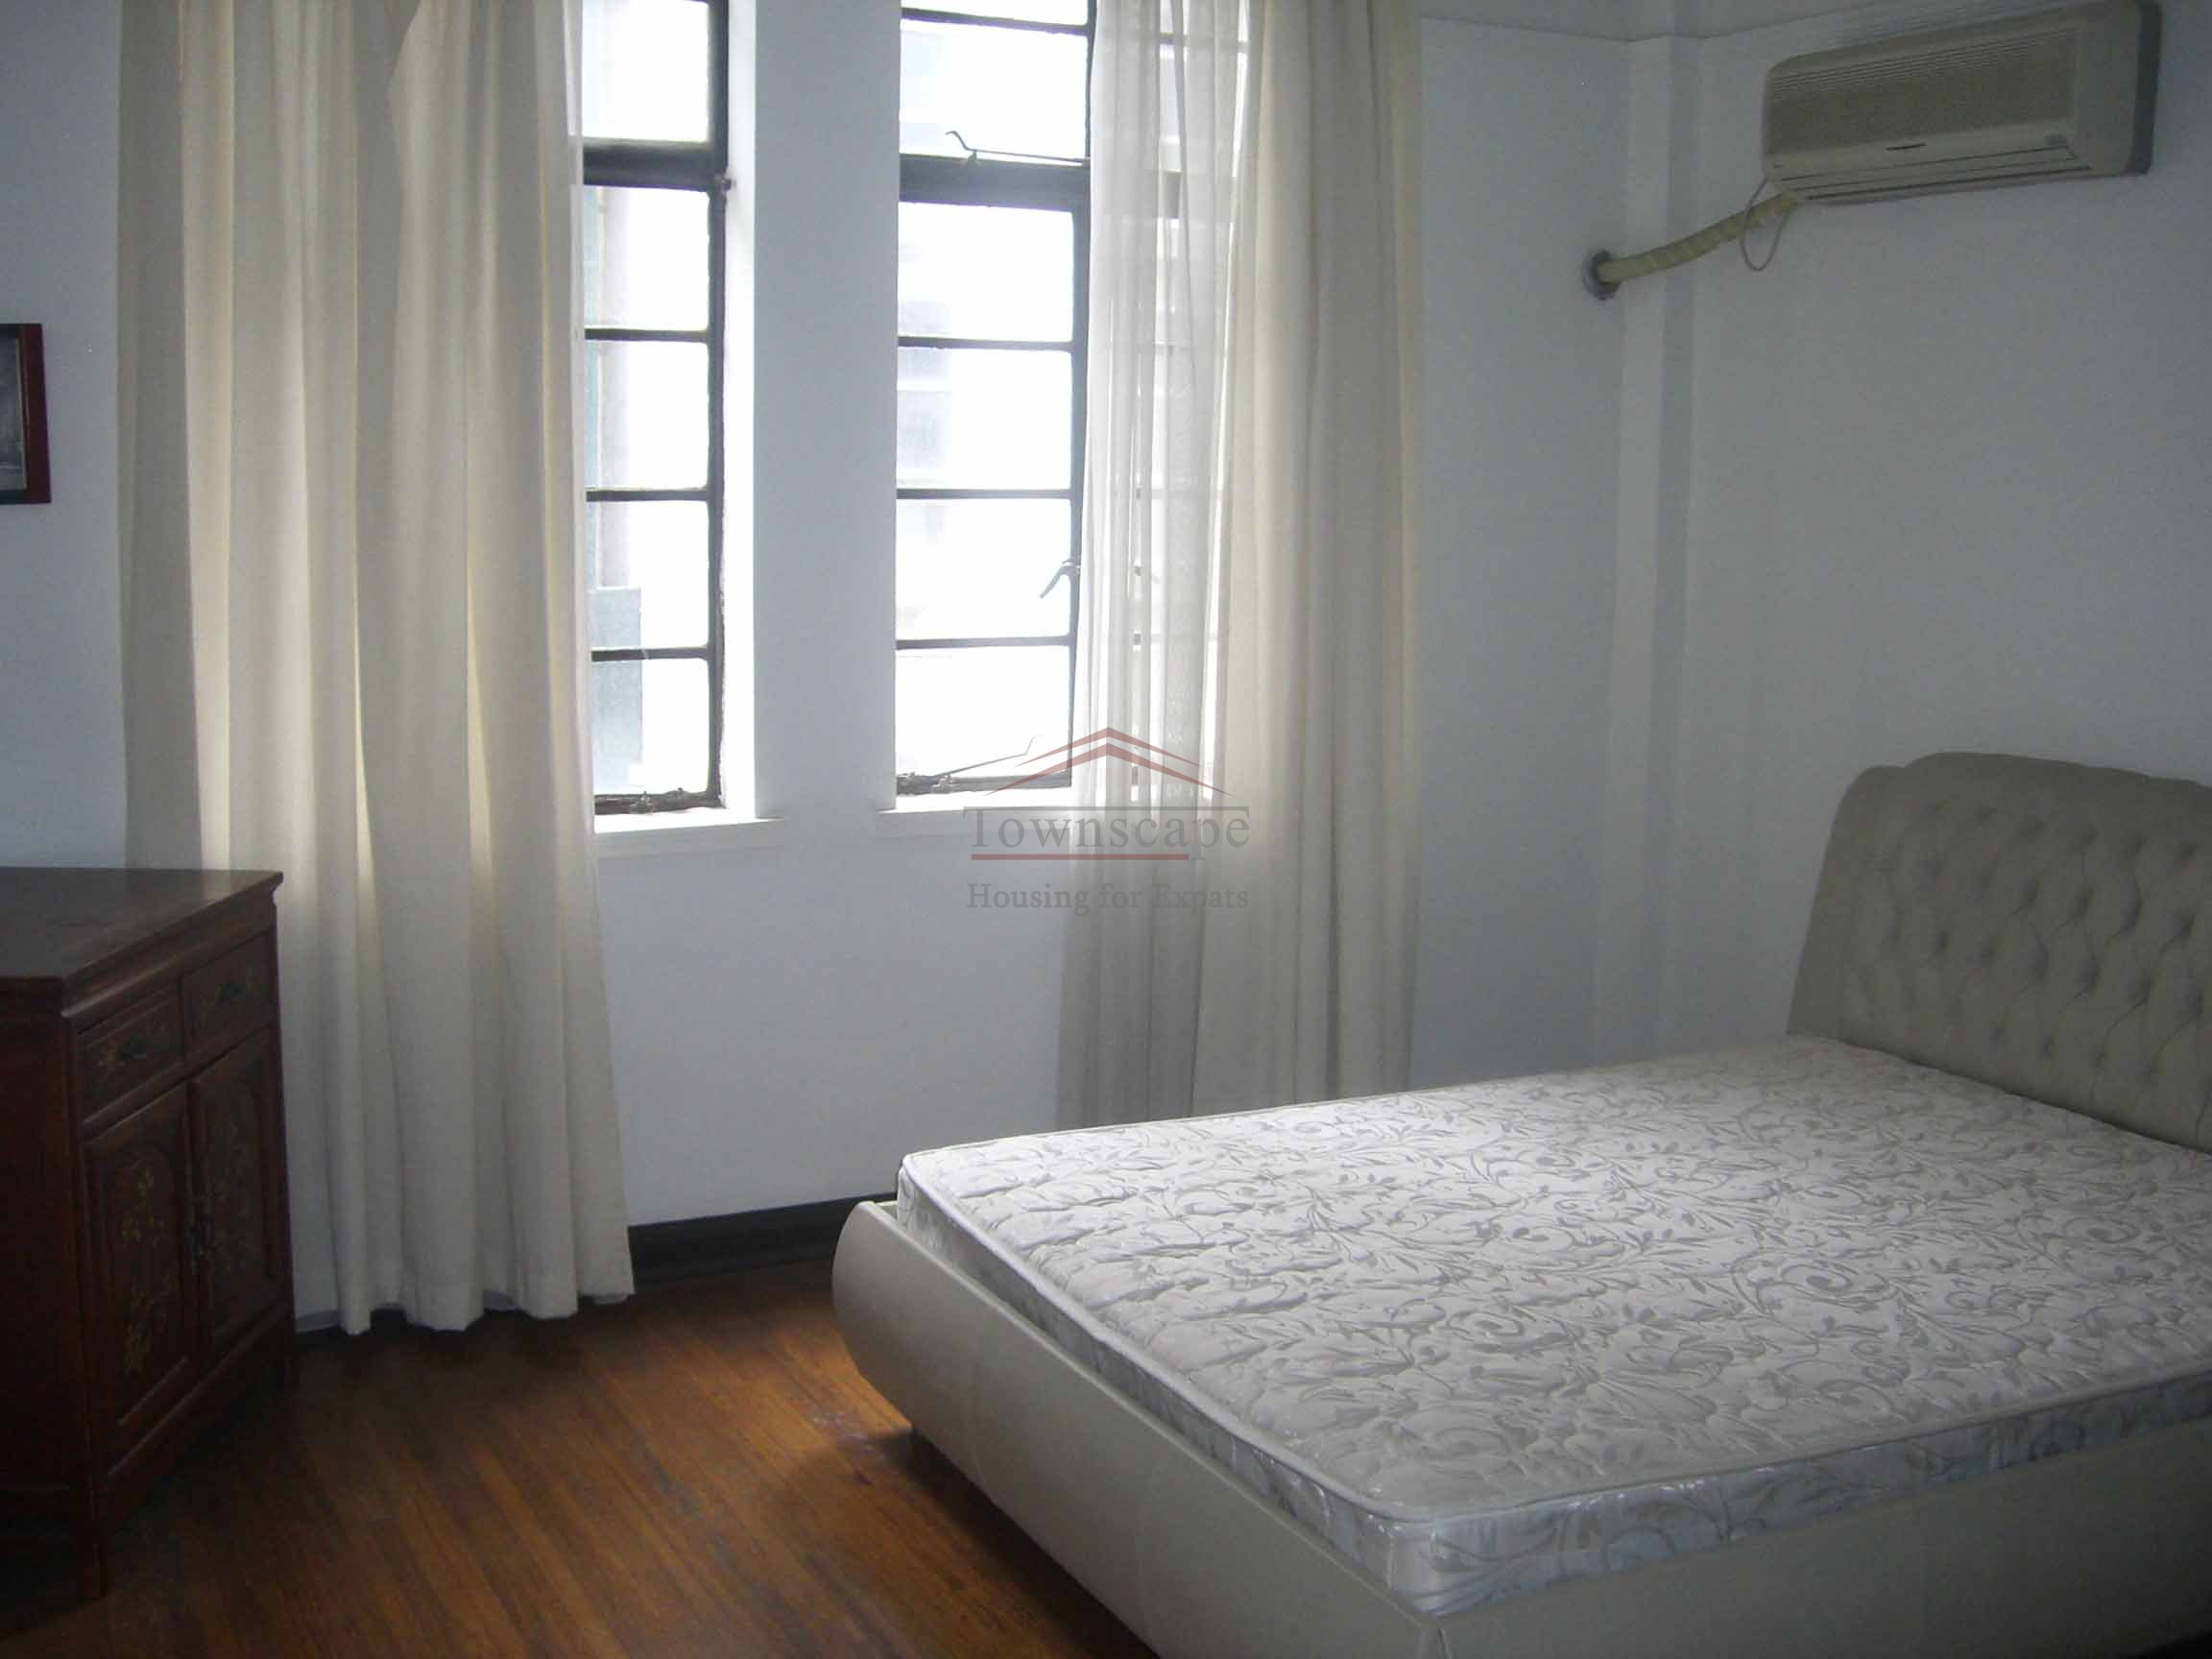 rent house in Shanghai 3 Bedroom Apt. West Nanjing rd. L2 w/Library